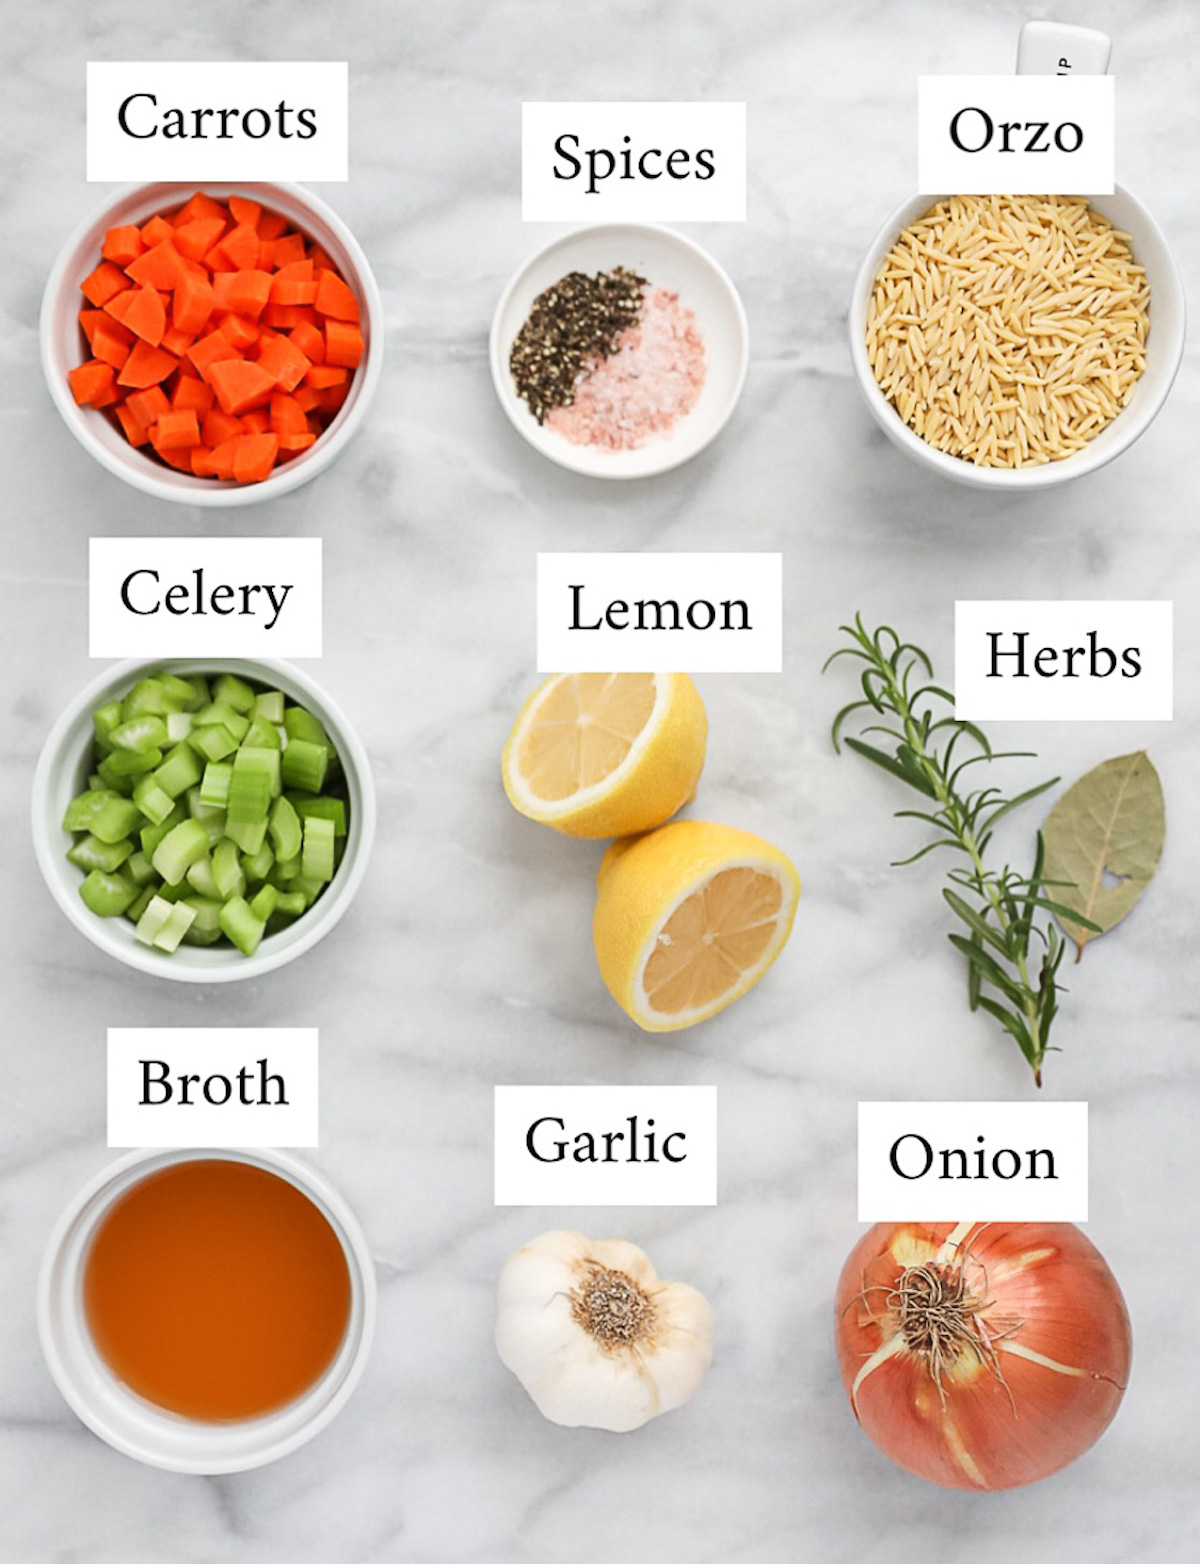 Labeled ingredients including: carrots, spices, orzo, celery, lemon, herbs, broth, garlic, and onion.